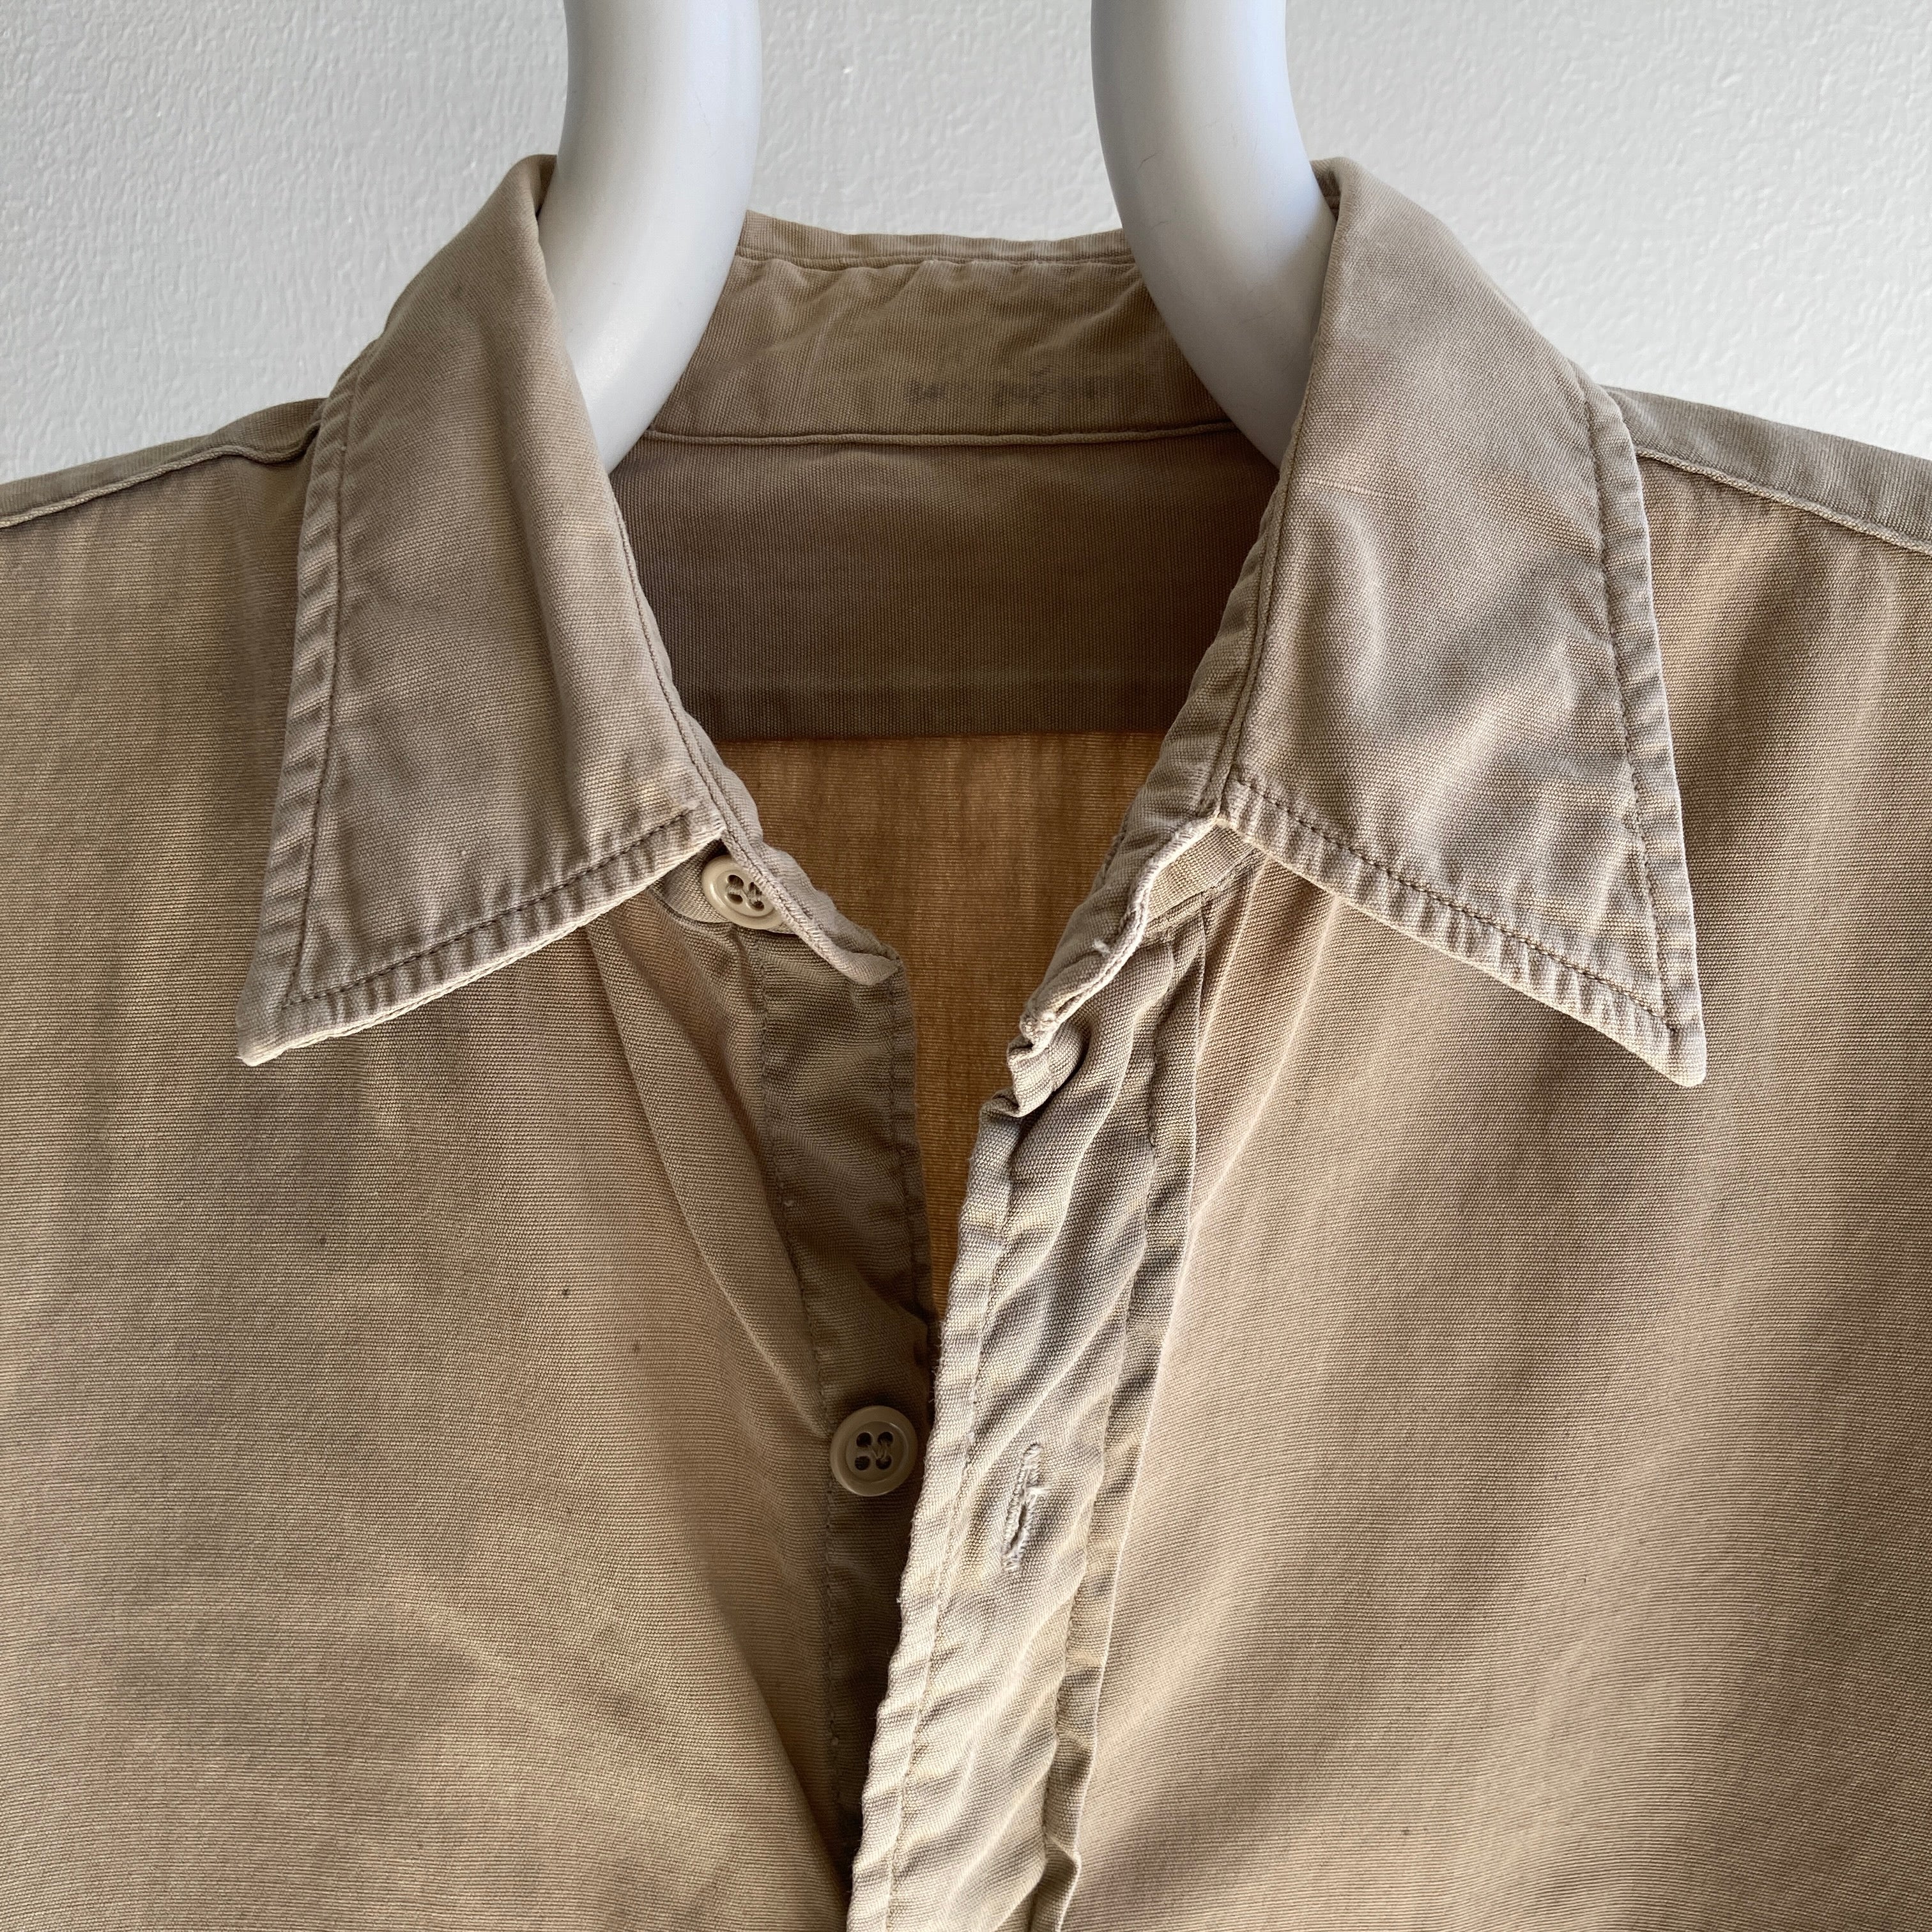 Sept 9, 1954 Made in Tennessee Beat Up Khaki Cotton Button Down Shirt